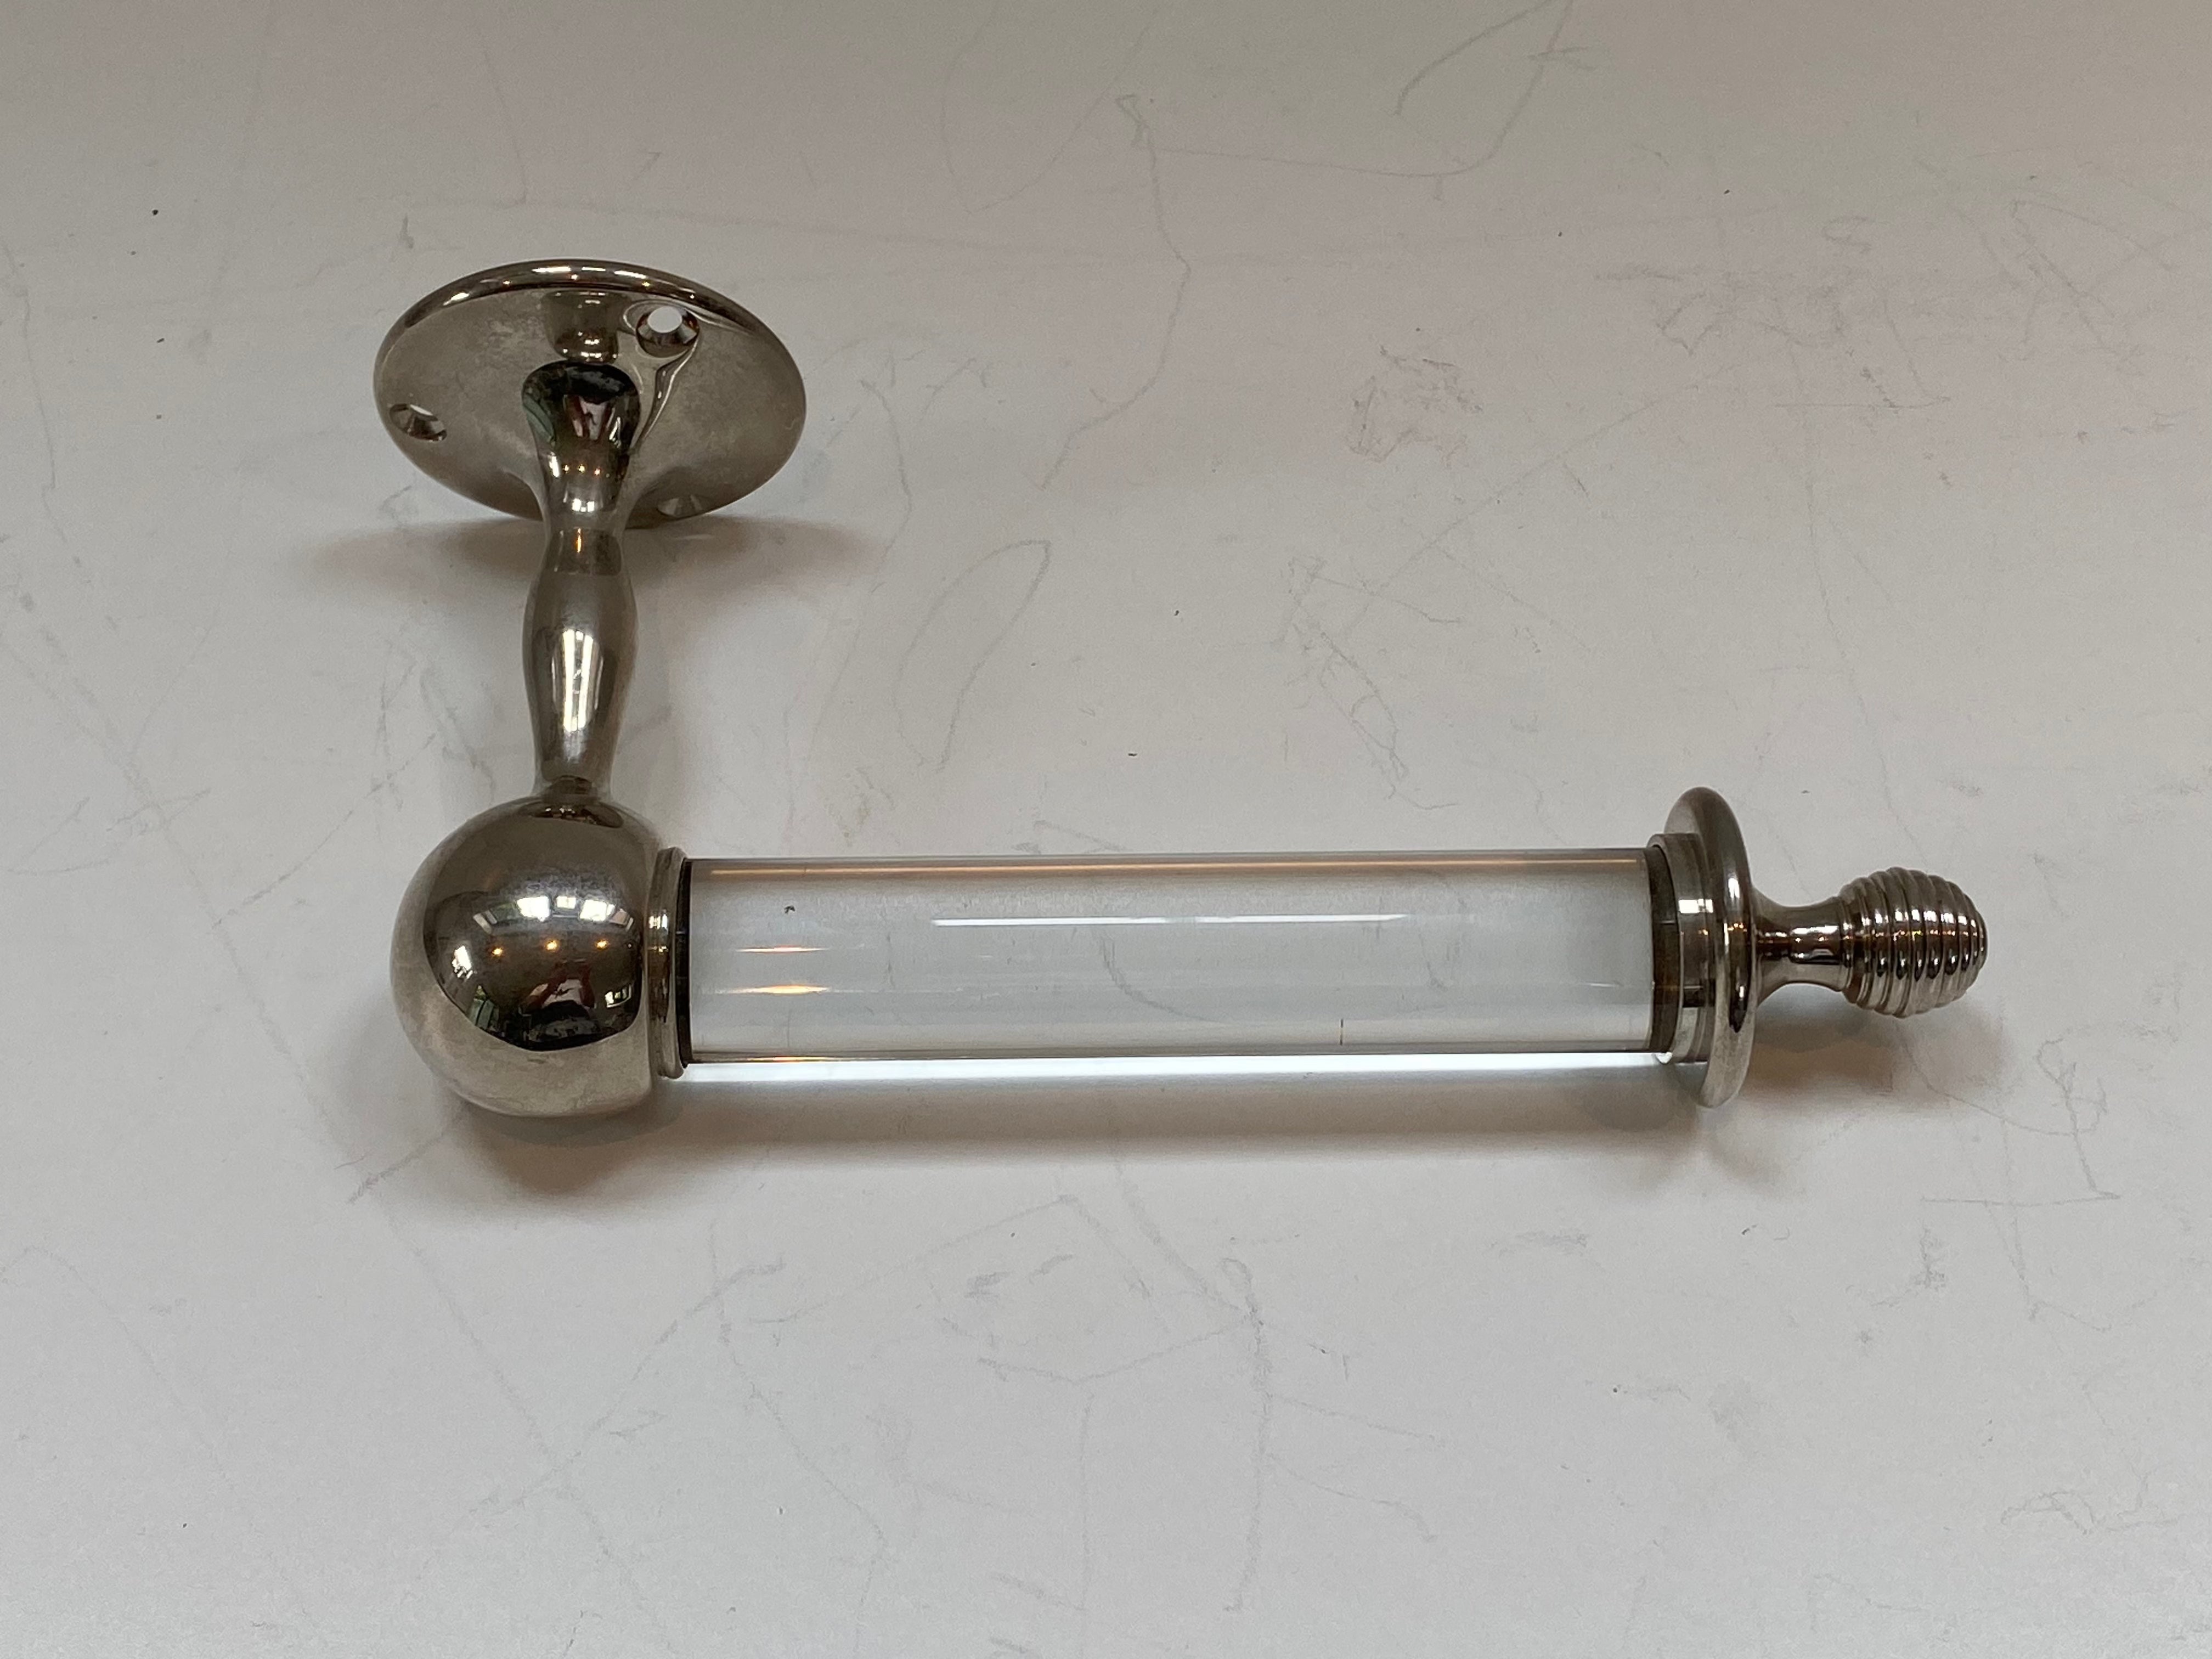 Glass and Brass Roll Holder in Nickel Plate